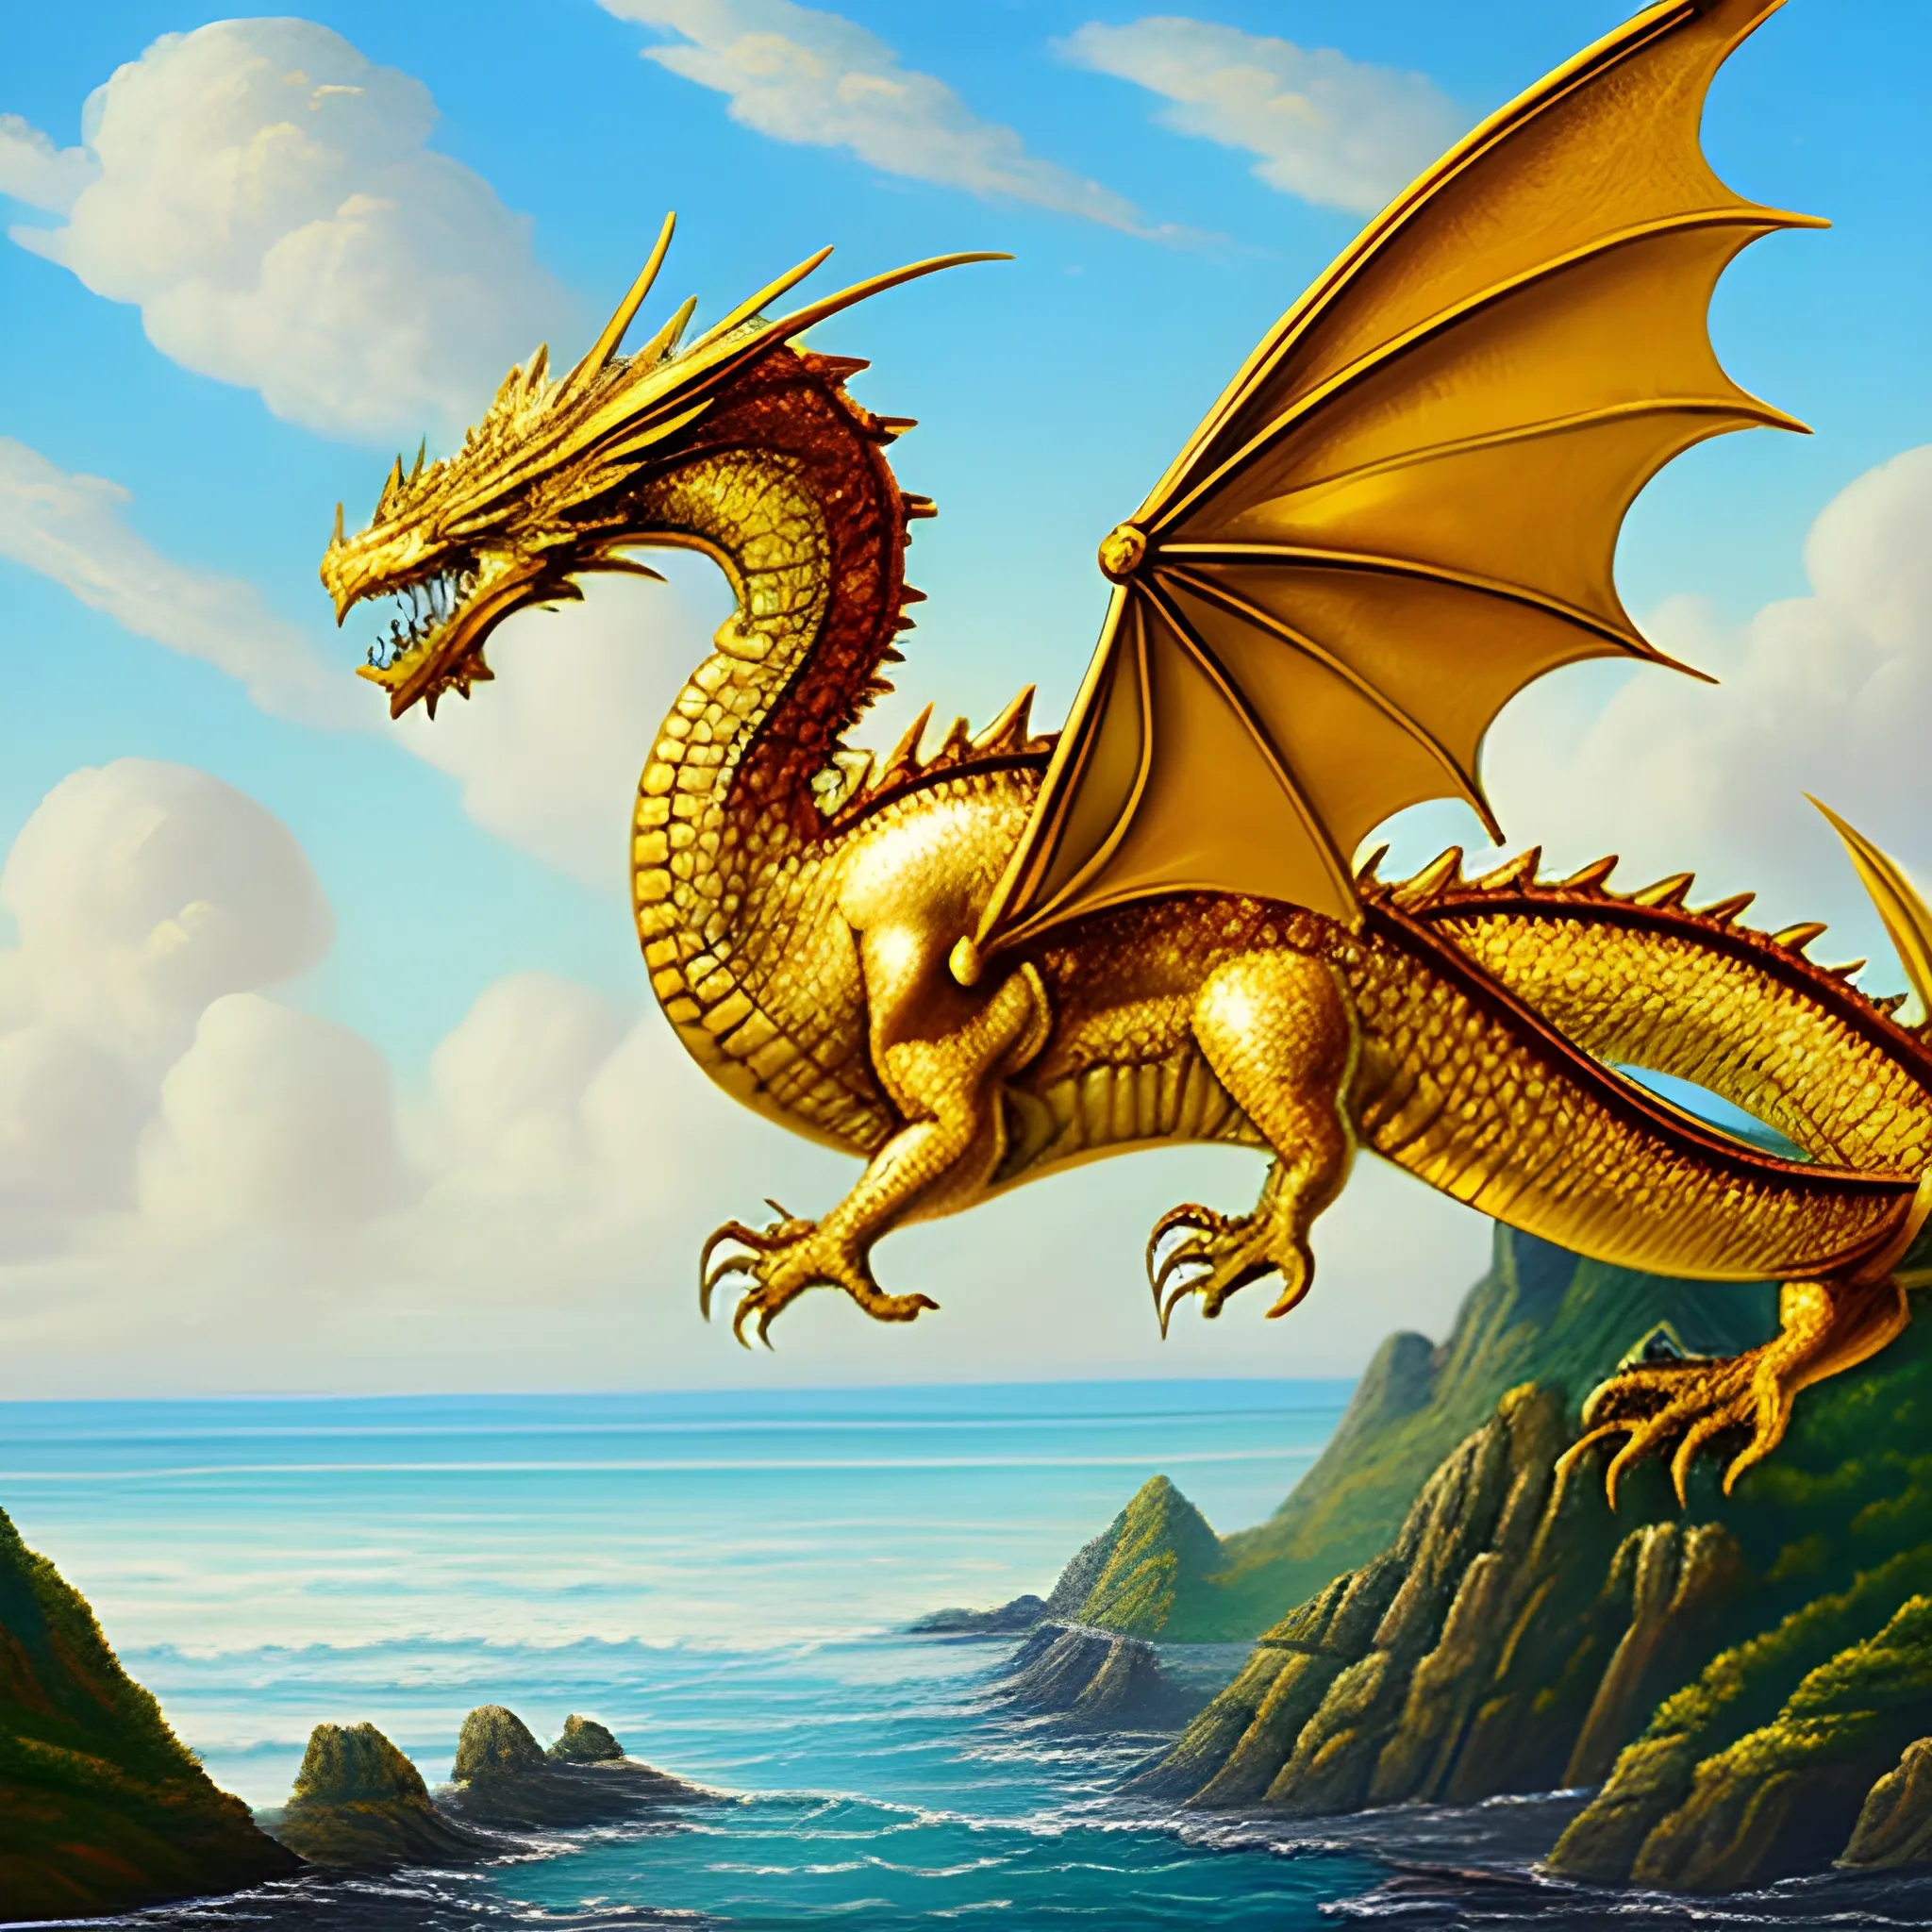 Widescreen gold dragon soaring over a castle on a seashore, Oil Painting